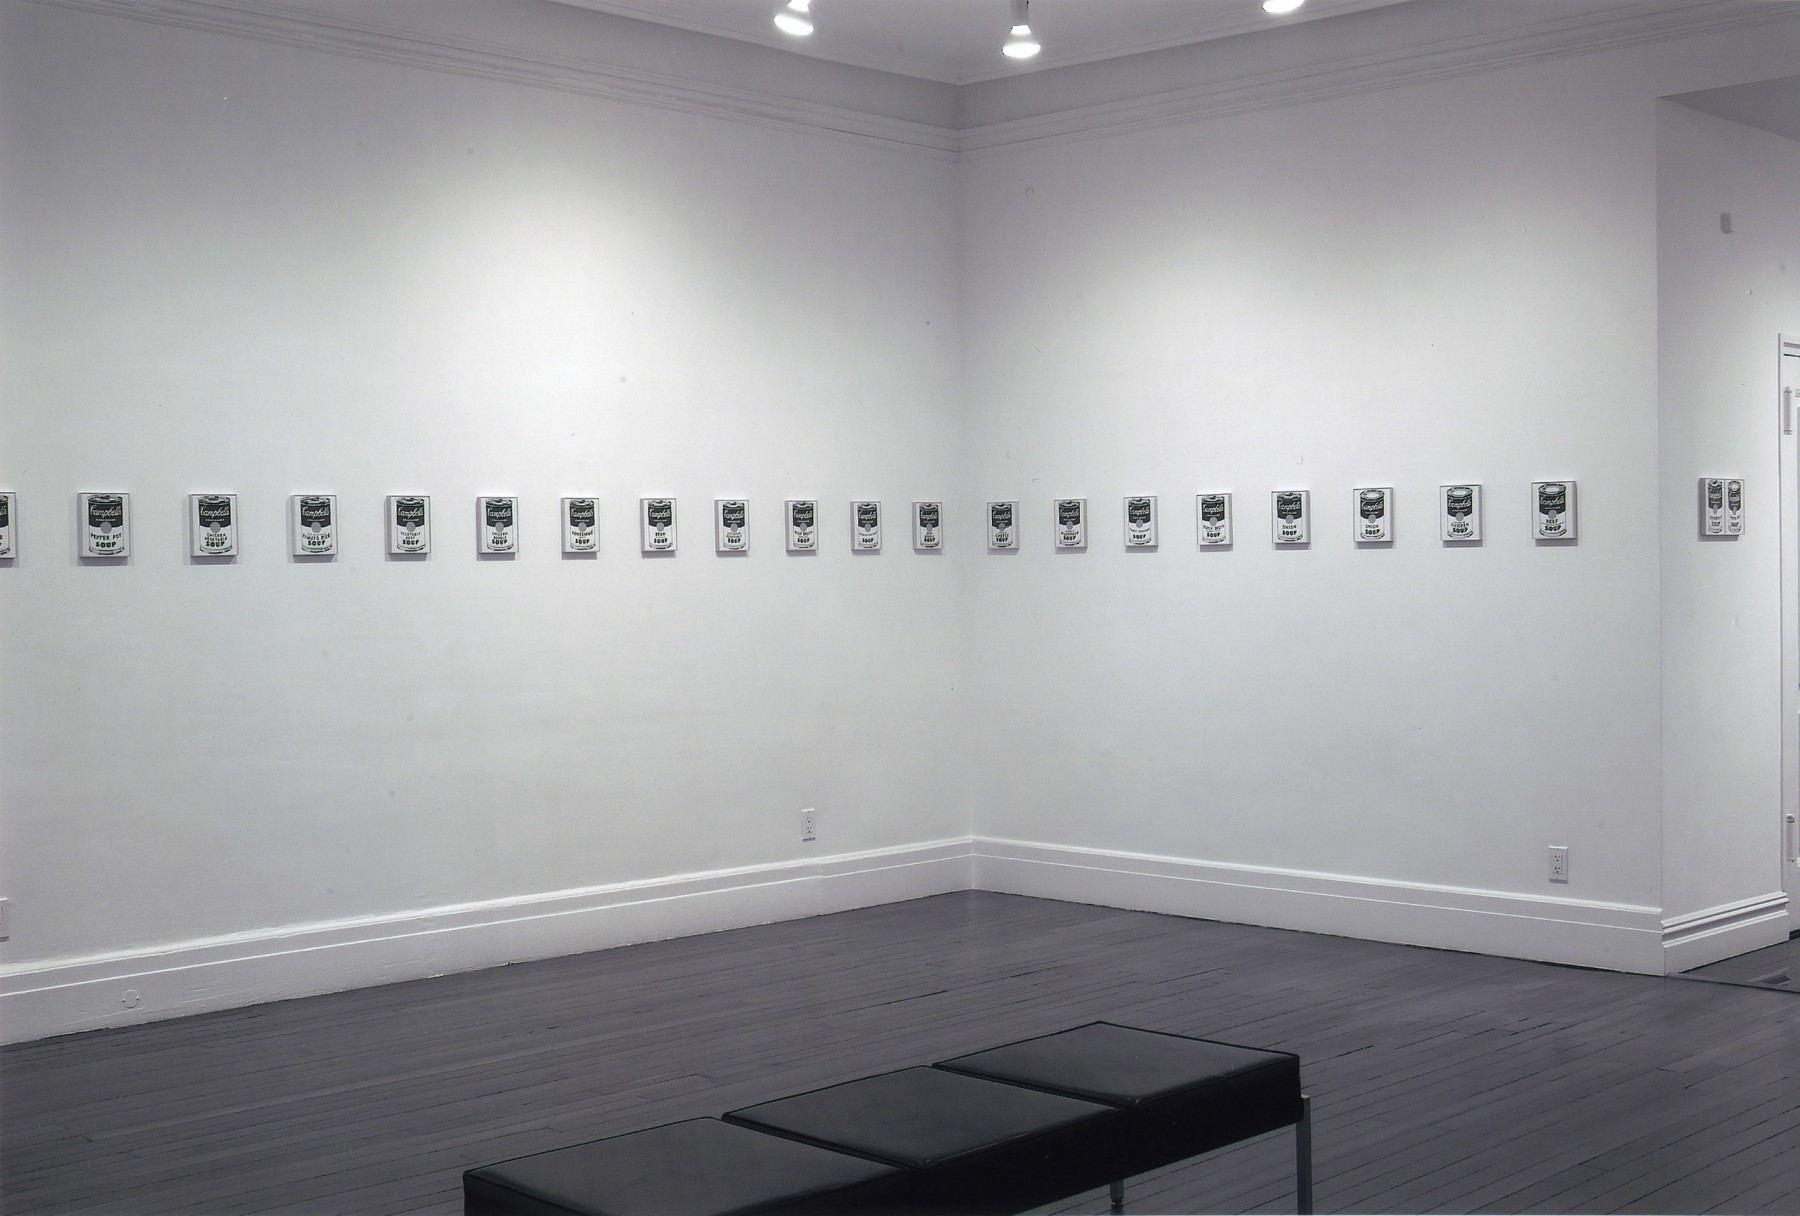 Installation views, Richard Pettibone: Sixty-four Campbell's Soup Cans, 18 EAST 77